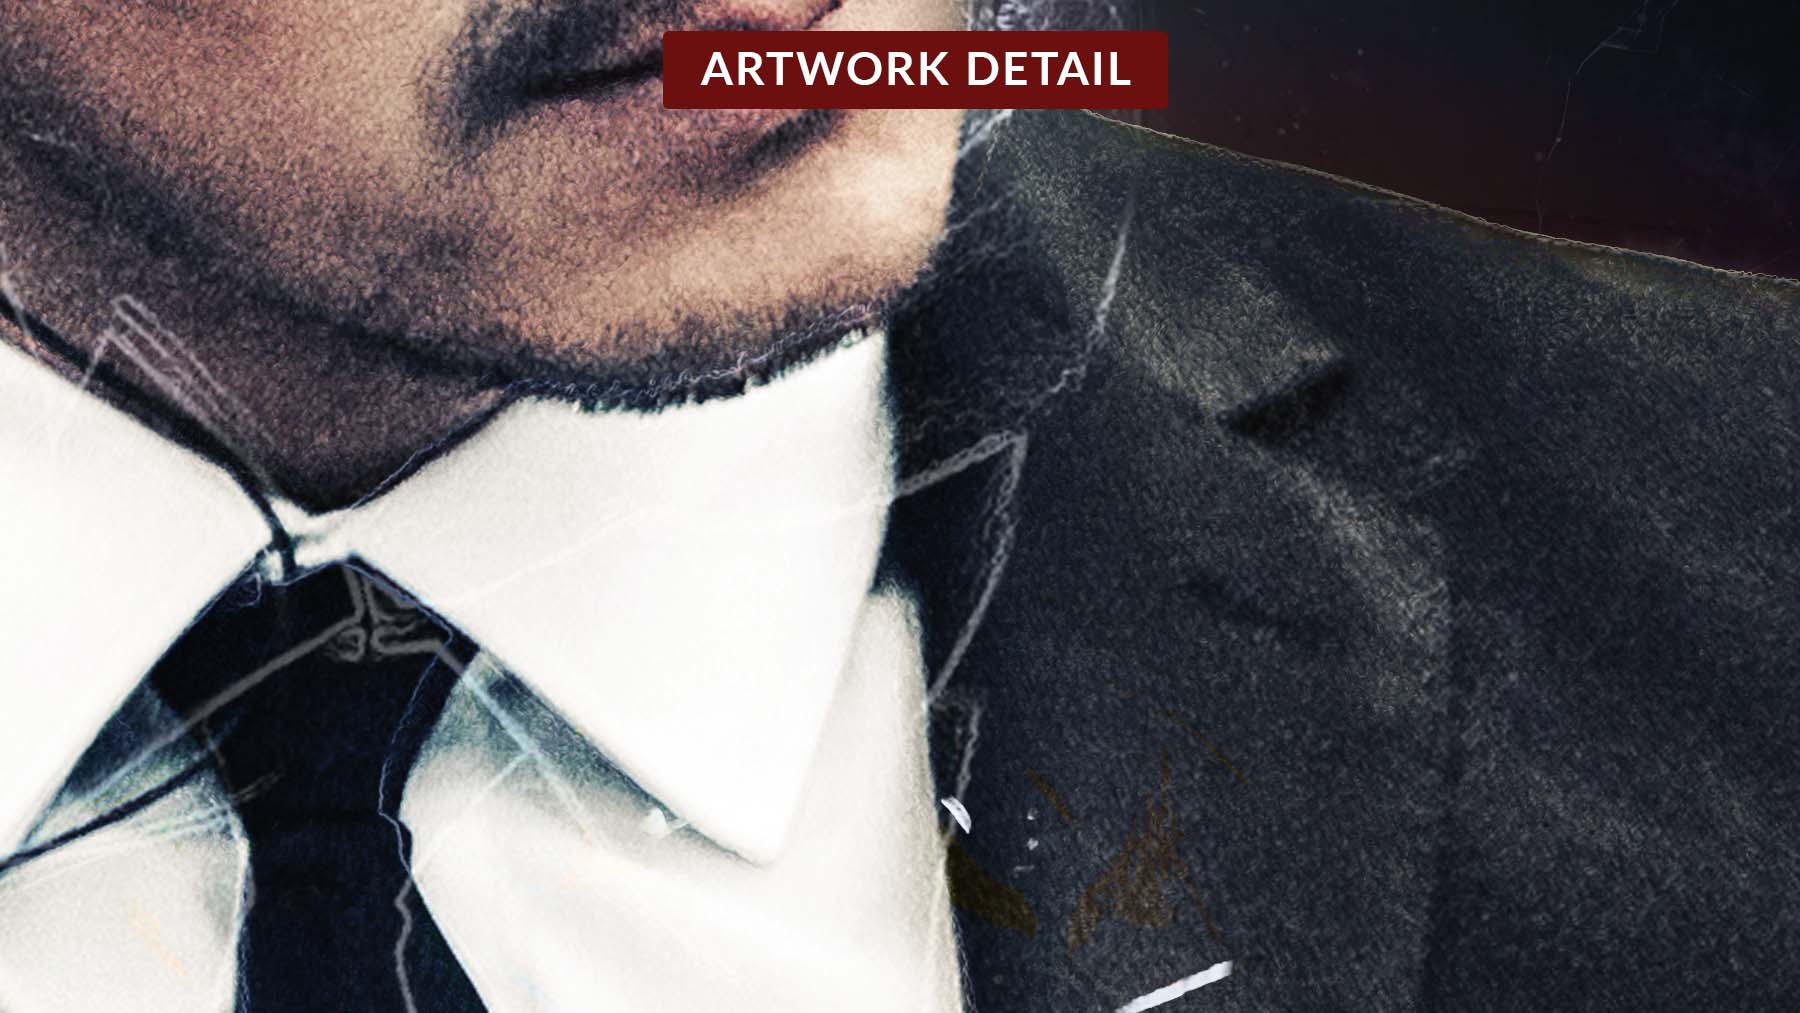 Detailed close-up of shirt collar and suit from the Agent Jim NFT collectible artwork